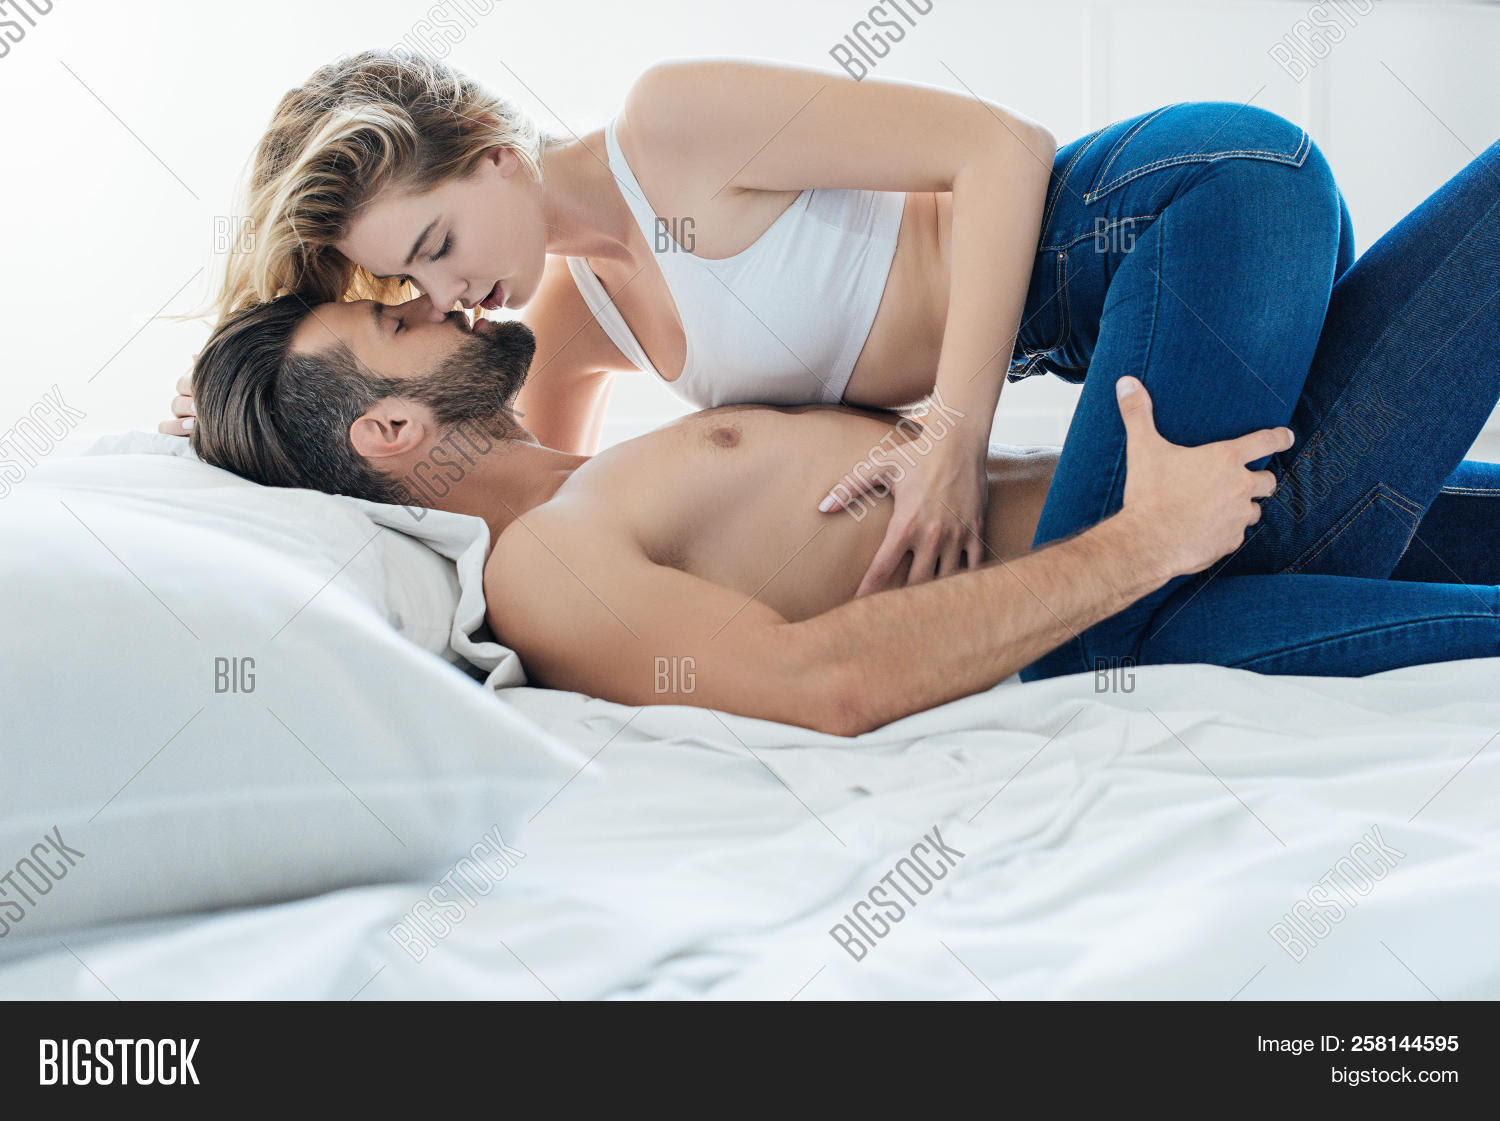 Side View Passionate Image & Photo (Free Trial) | Bigstock